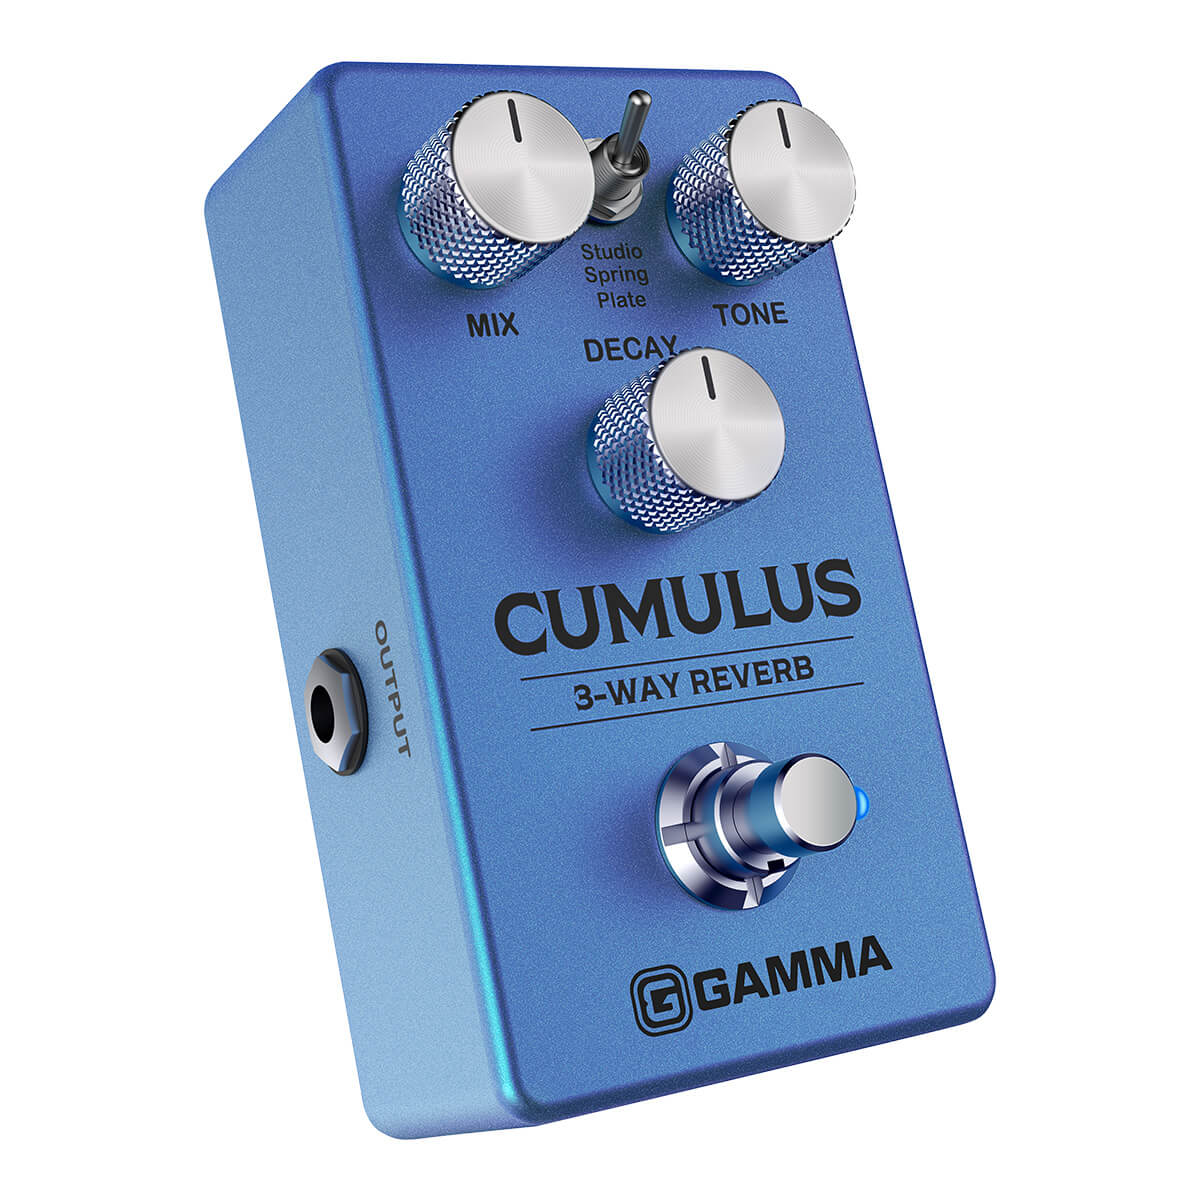 Gamma Cumulus 3-way reverb pedal angled right.